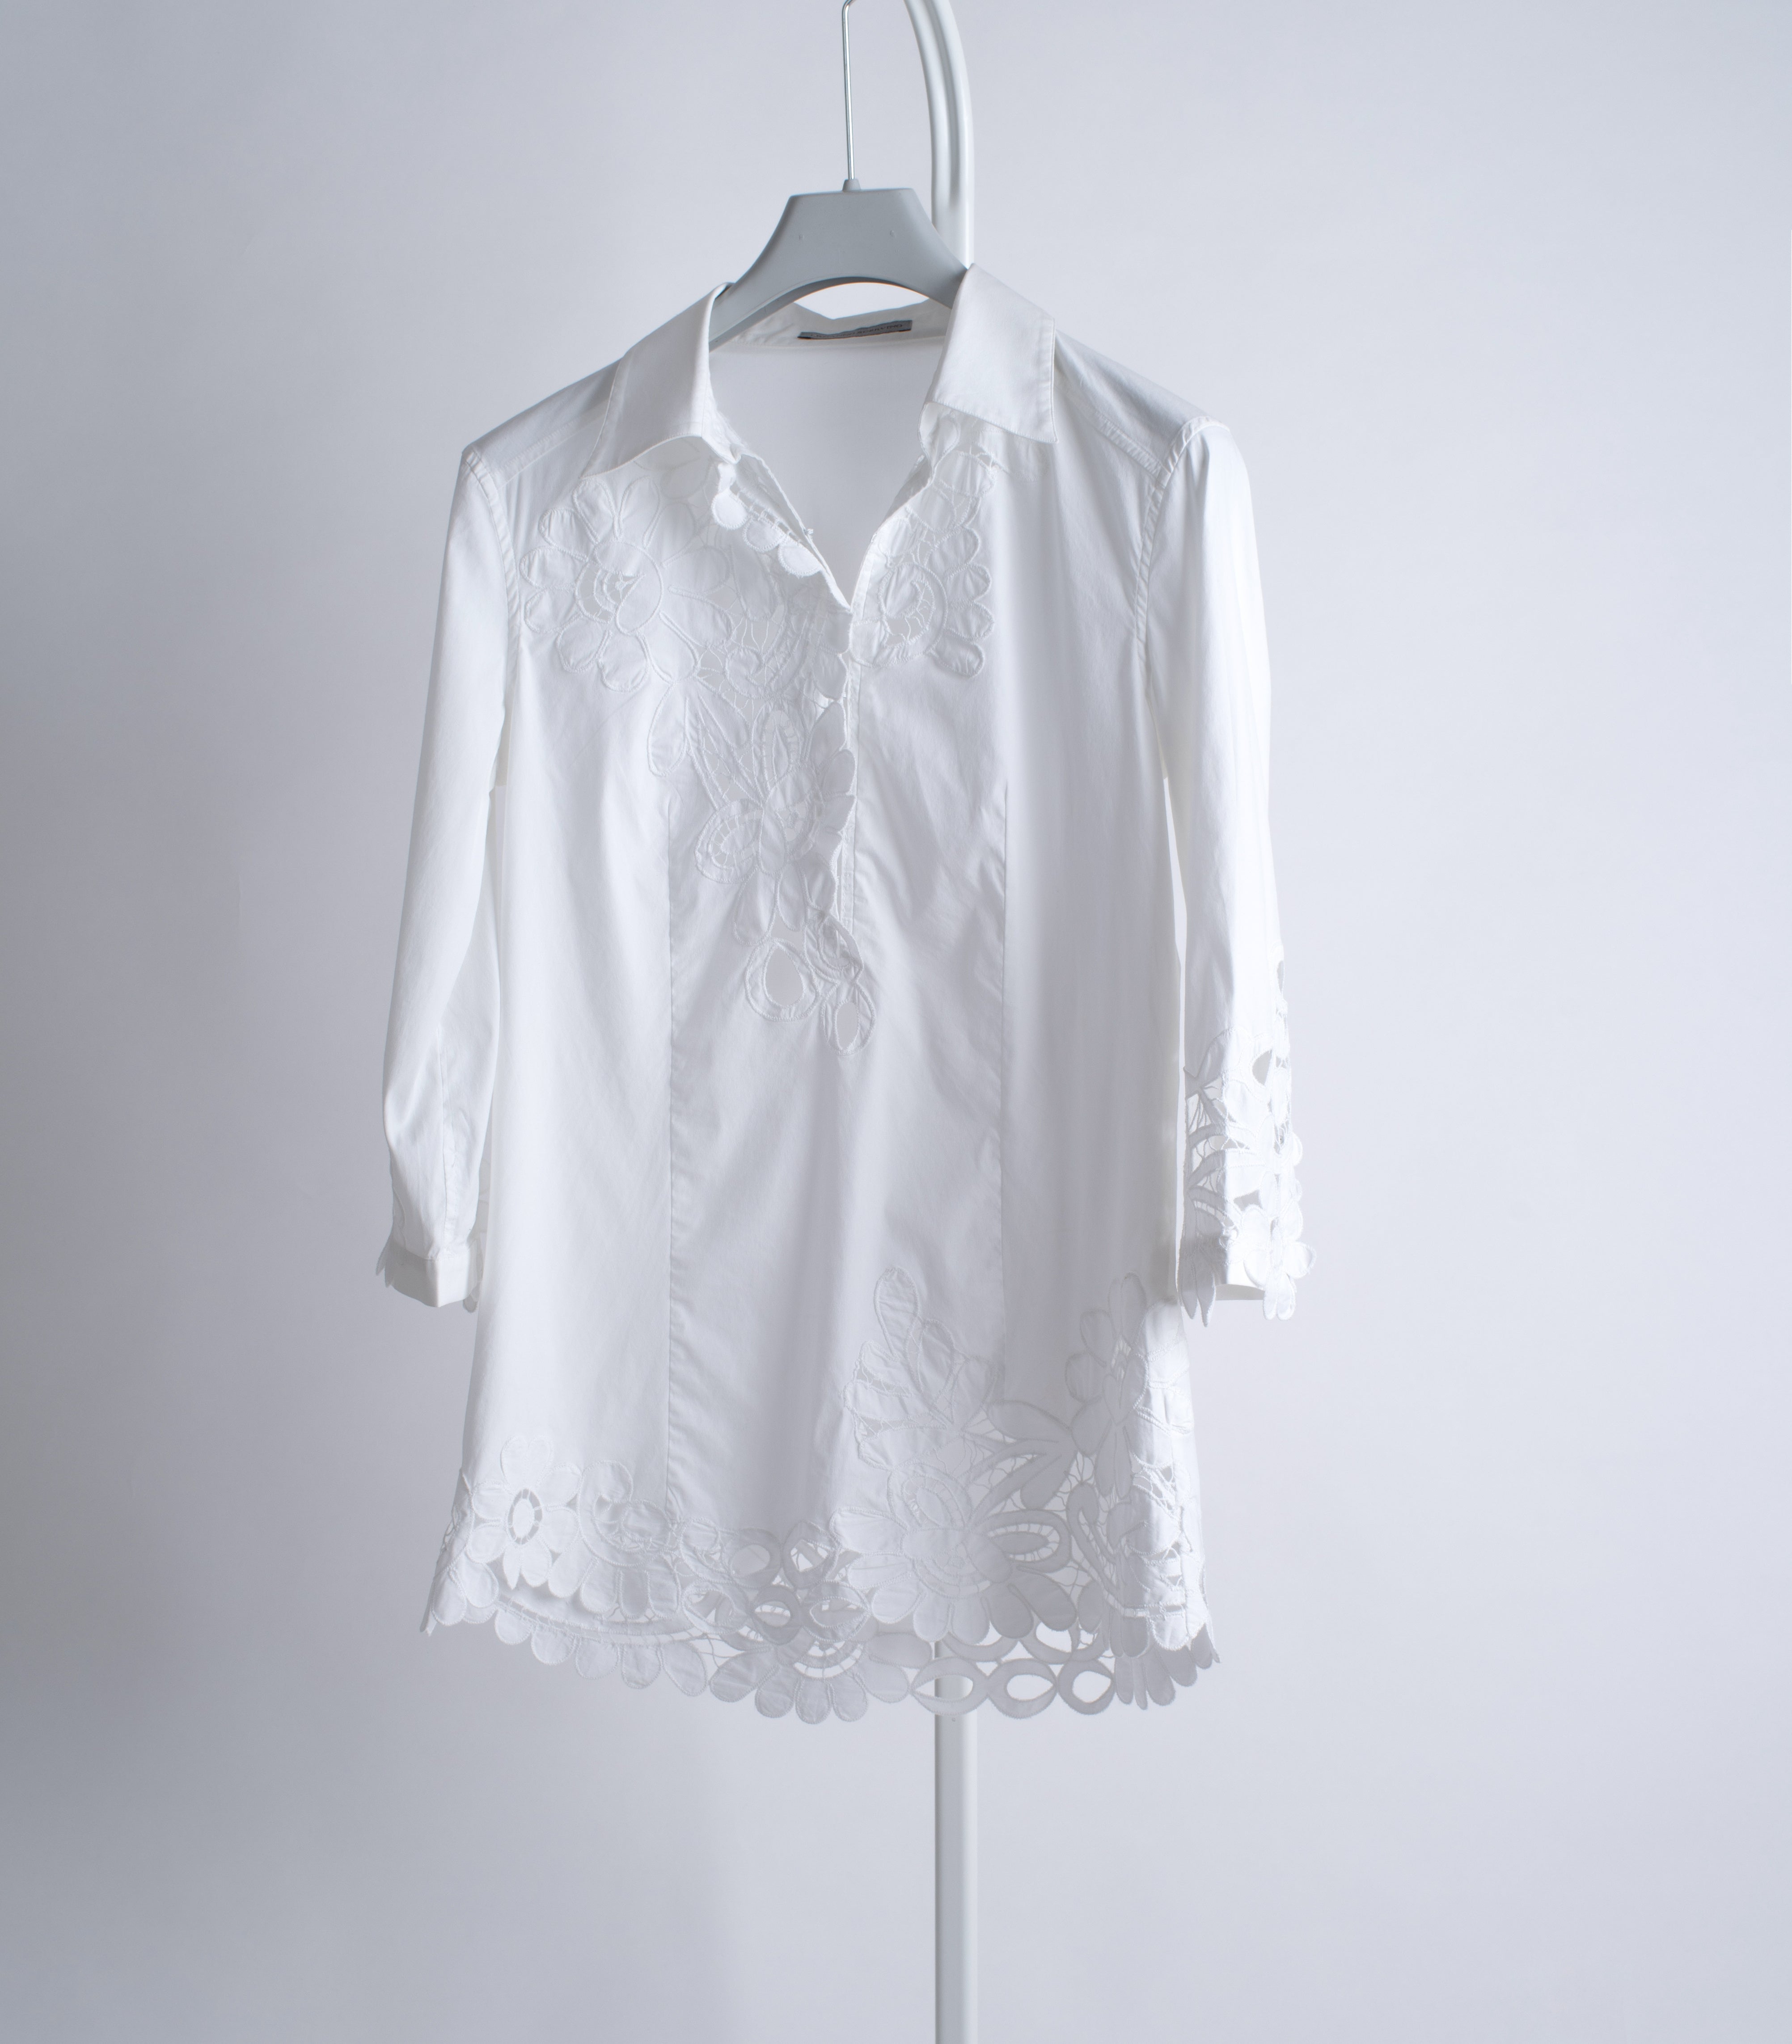 Ermanno Scervino Broderie Anglaise White Shirt, Size S